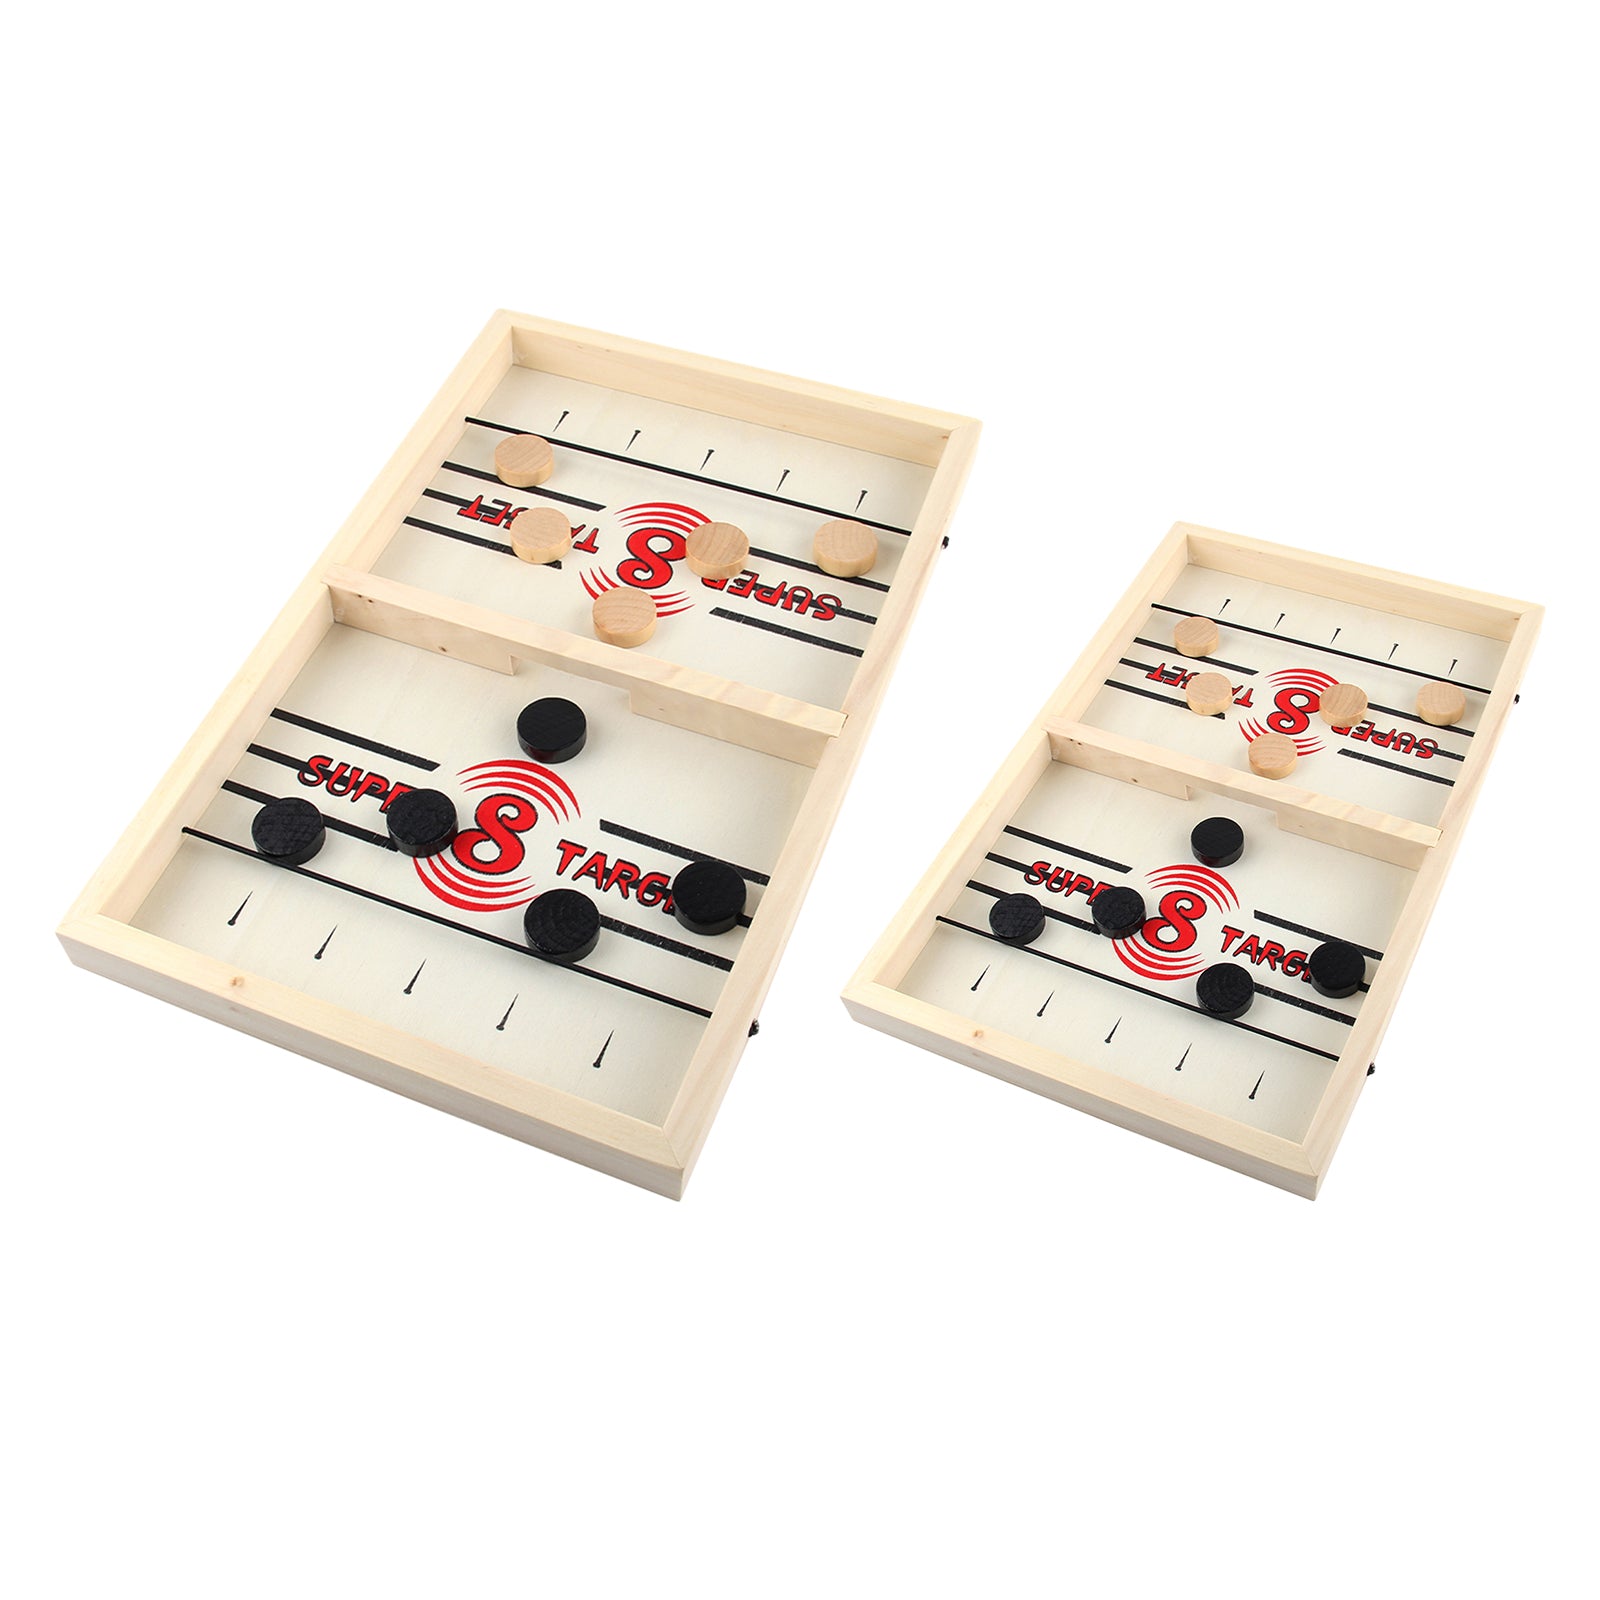 Wooden Desktop 2 in 1 Hockey Game Sling Puck Game Board Game Home Sports Toy S